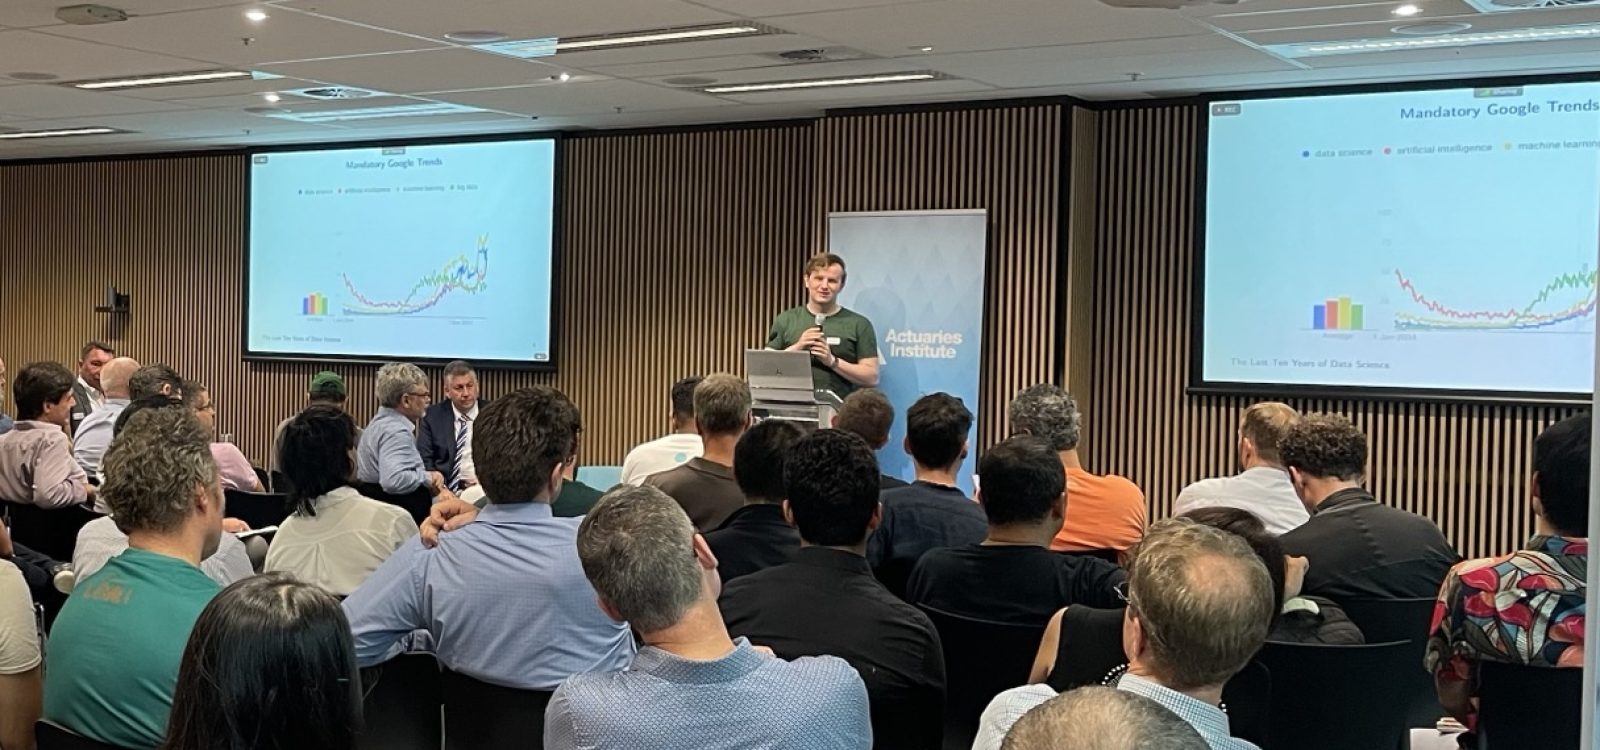 Actuaries Institute hosts Data Science Sydney Meet-Up: Chat GPT, pizza and more